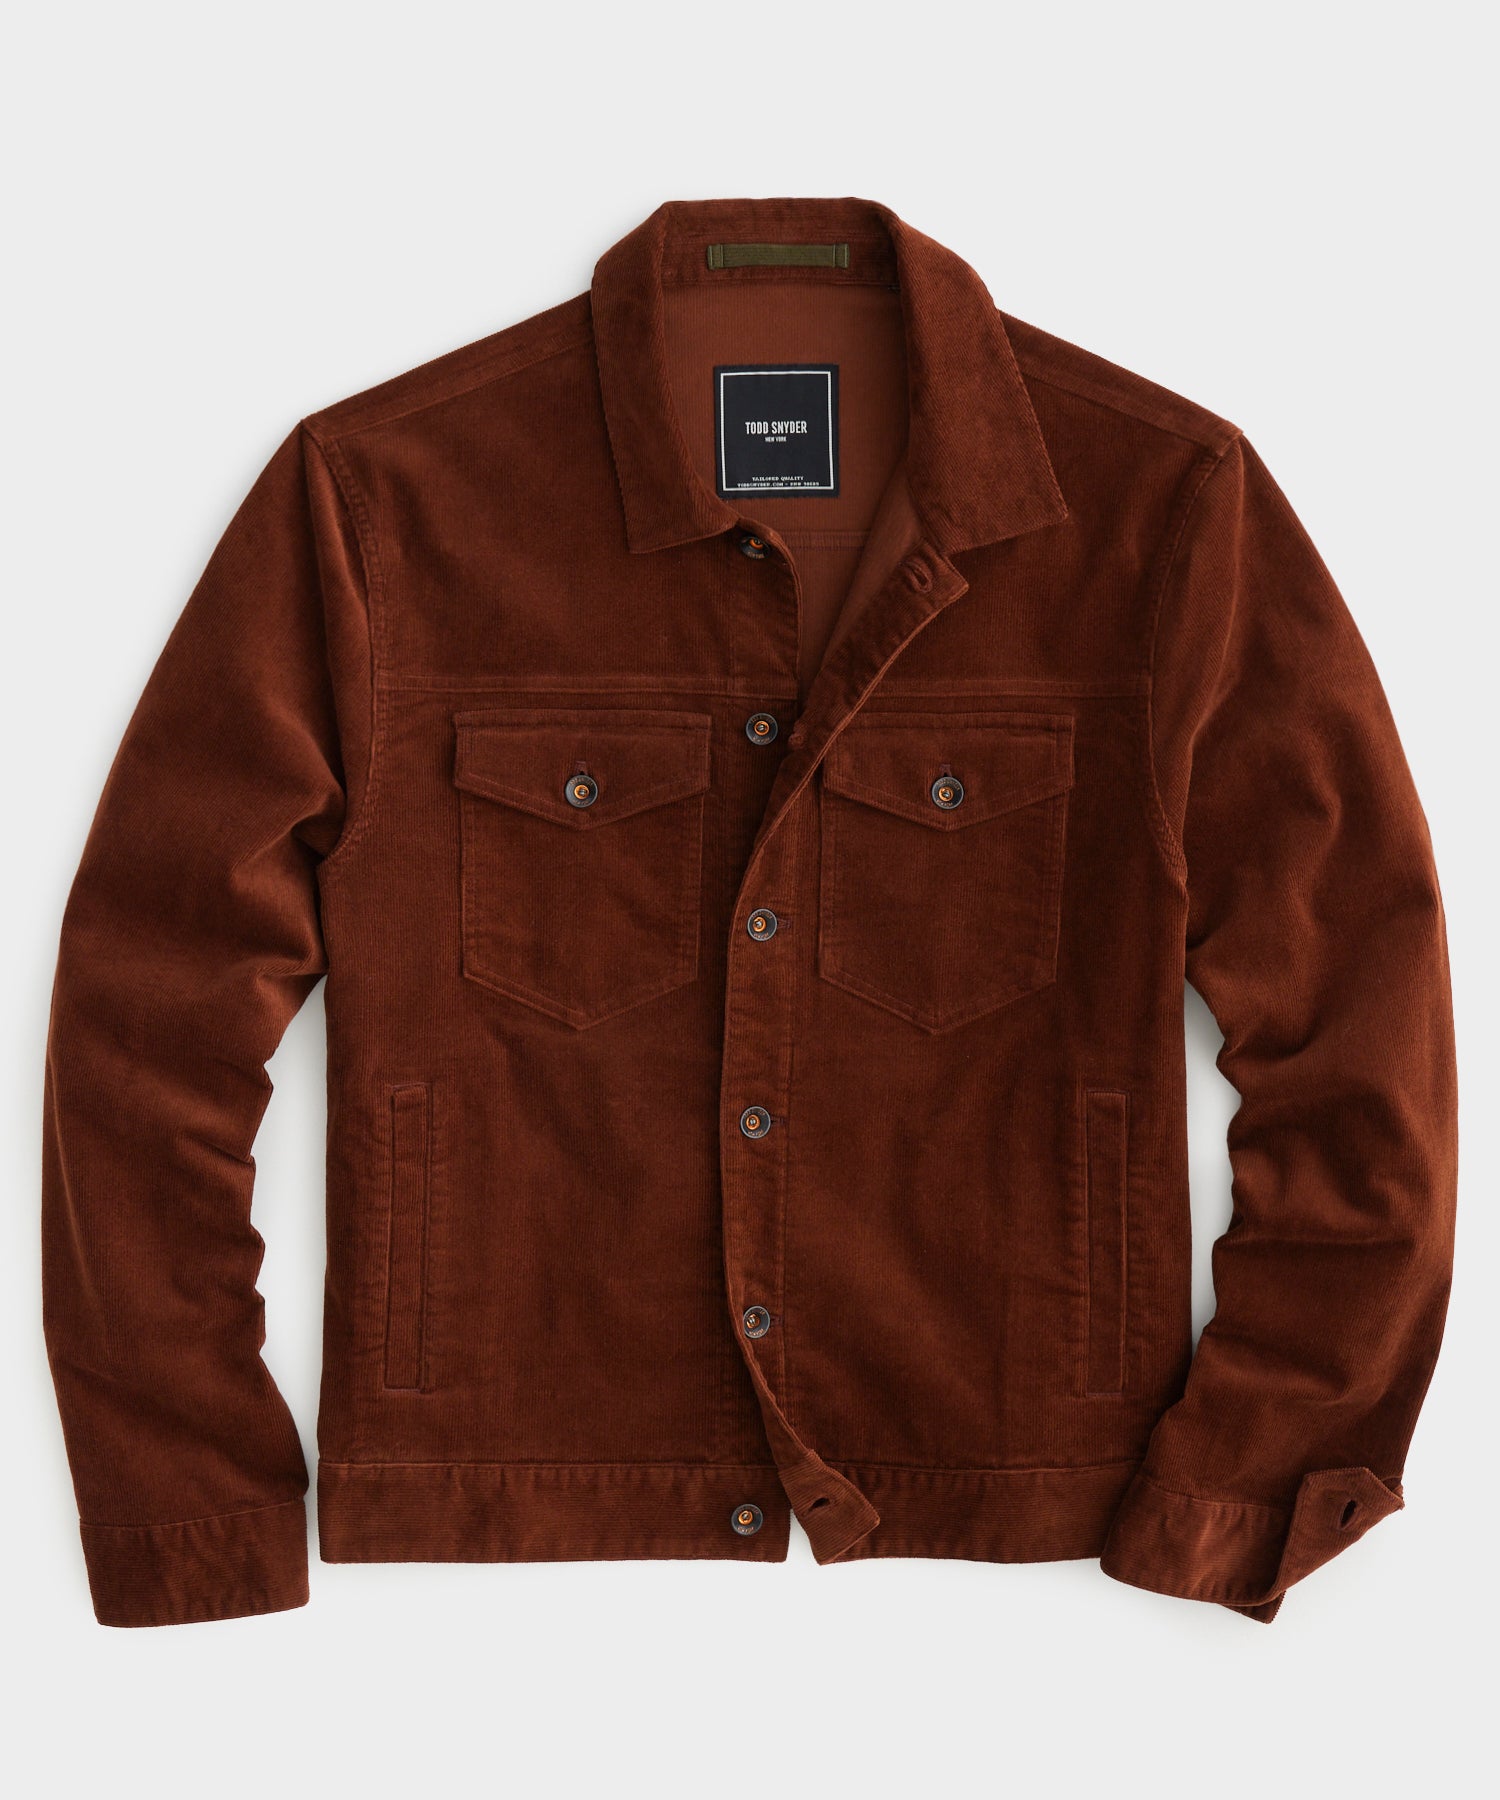 Todd Snyder - TODD SNYDER CORDUROY DYLAN JACKET IN RUST - Rent With Thred